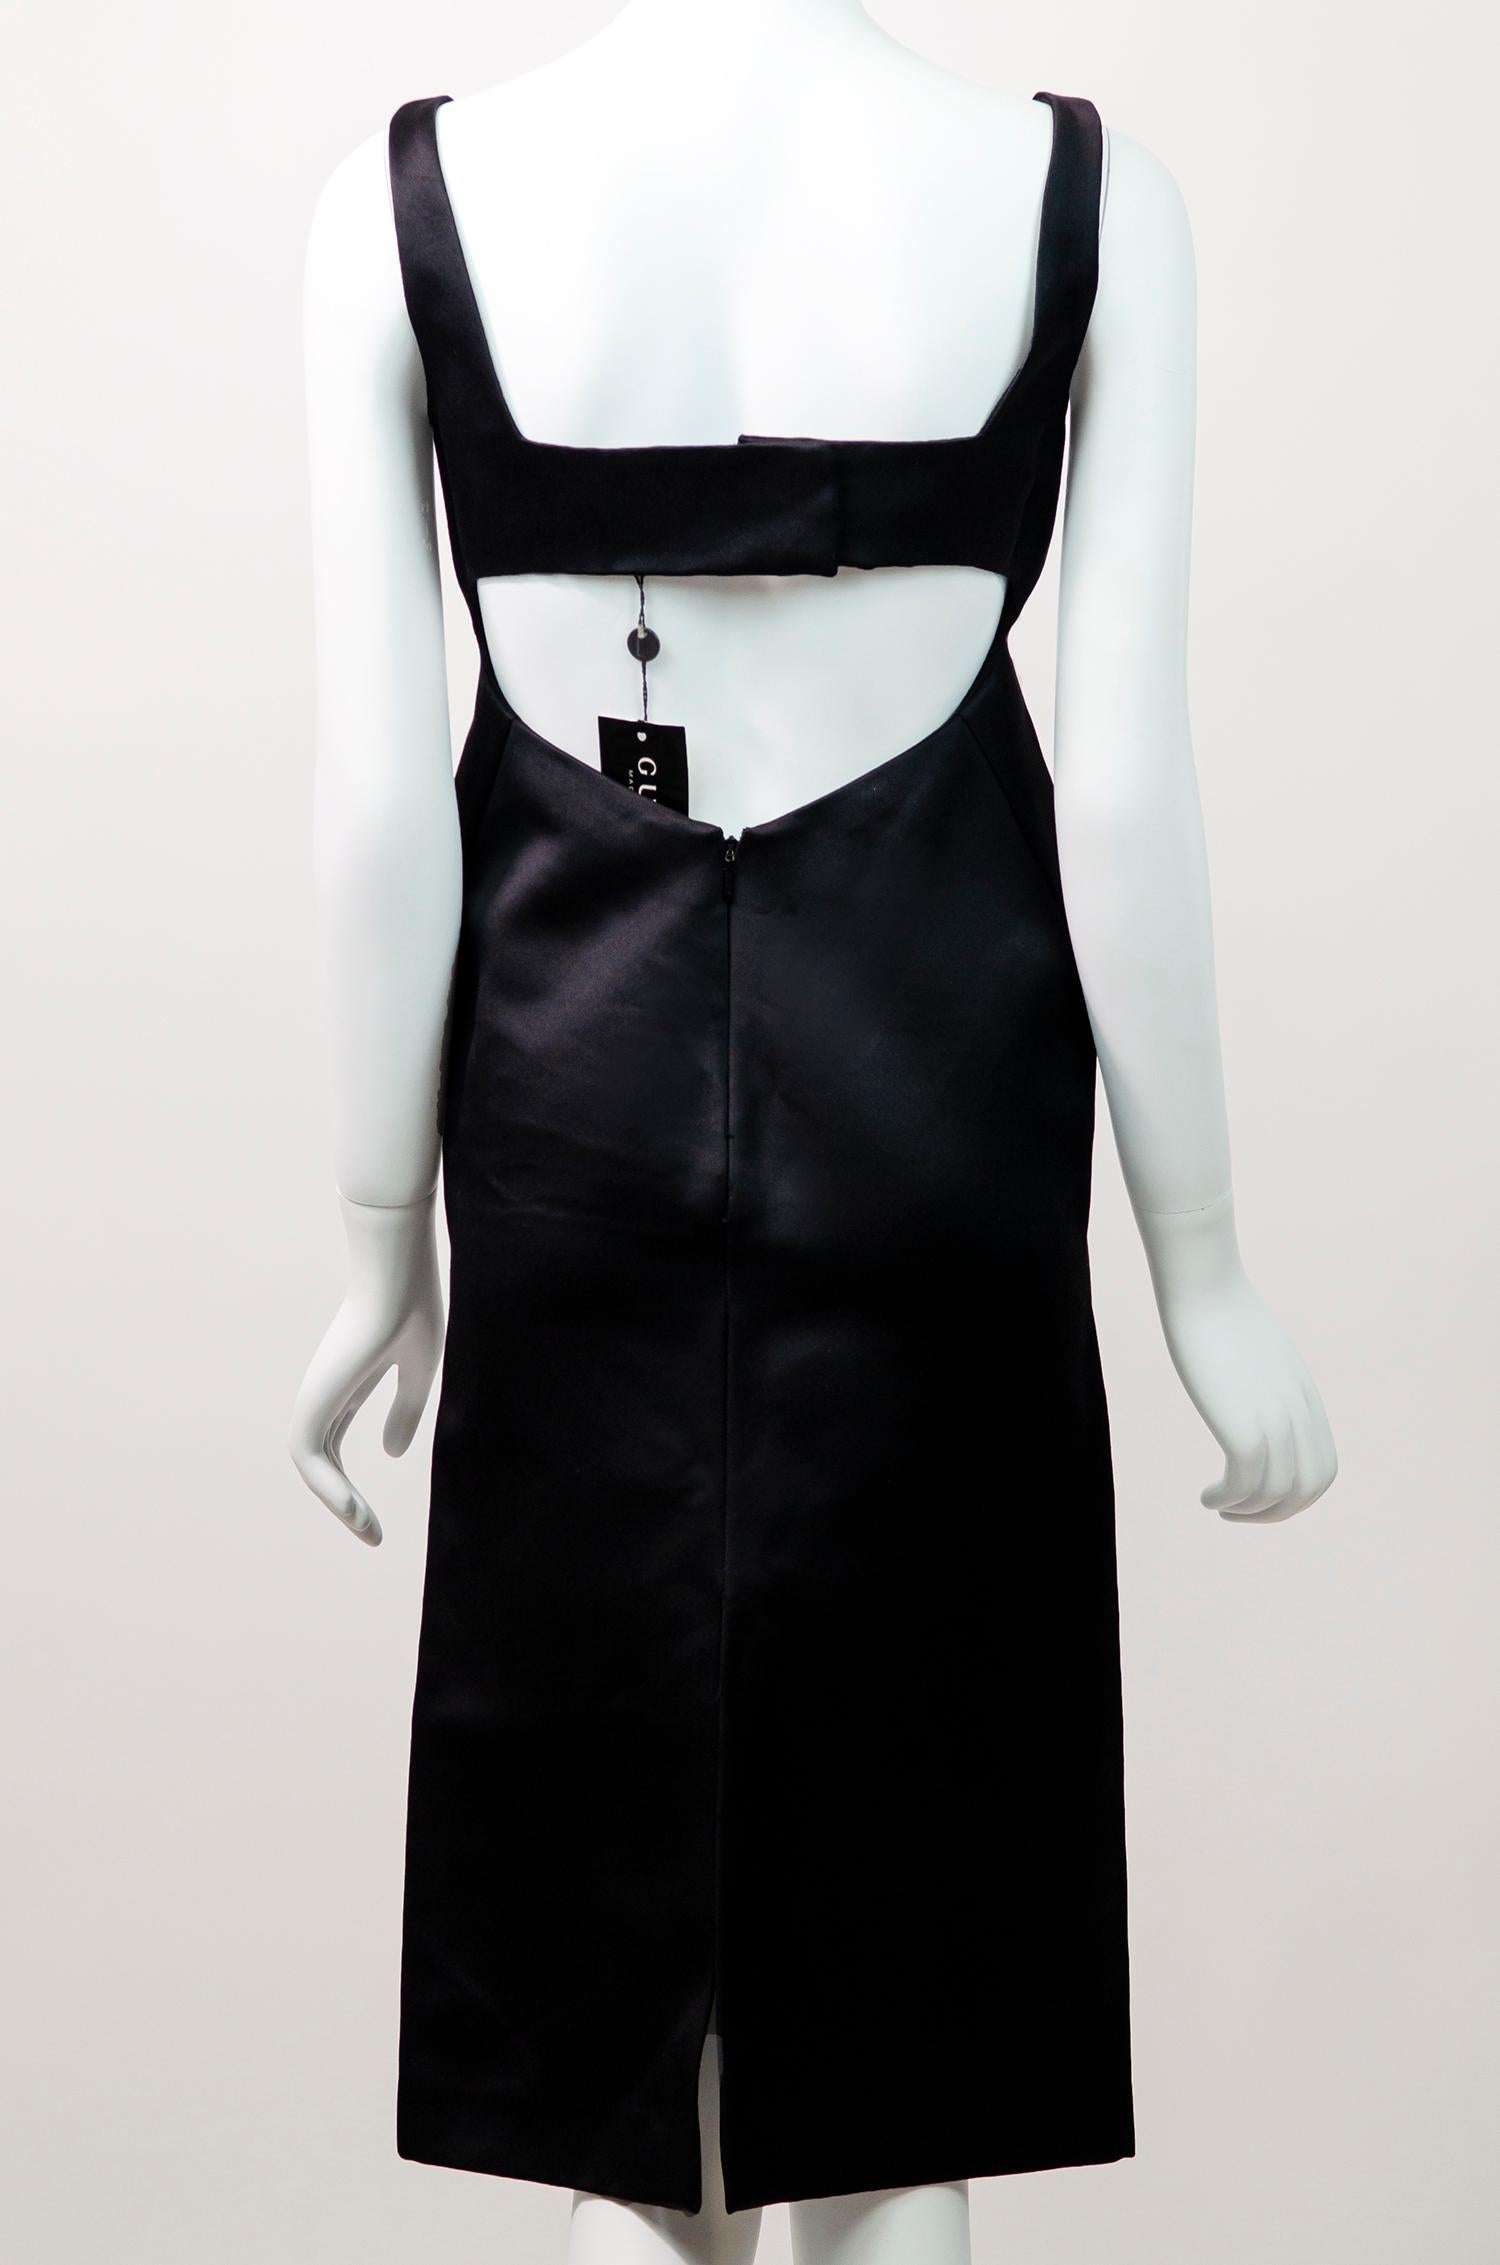 GUCCI BY TOM FORD F/W 2001 Runway Satin Dress - With Original Tags For Sale 1